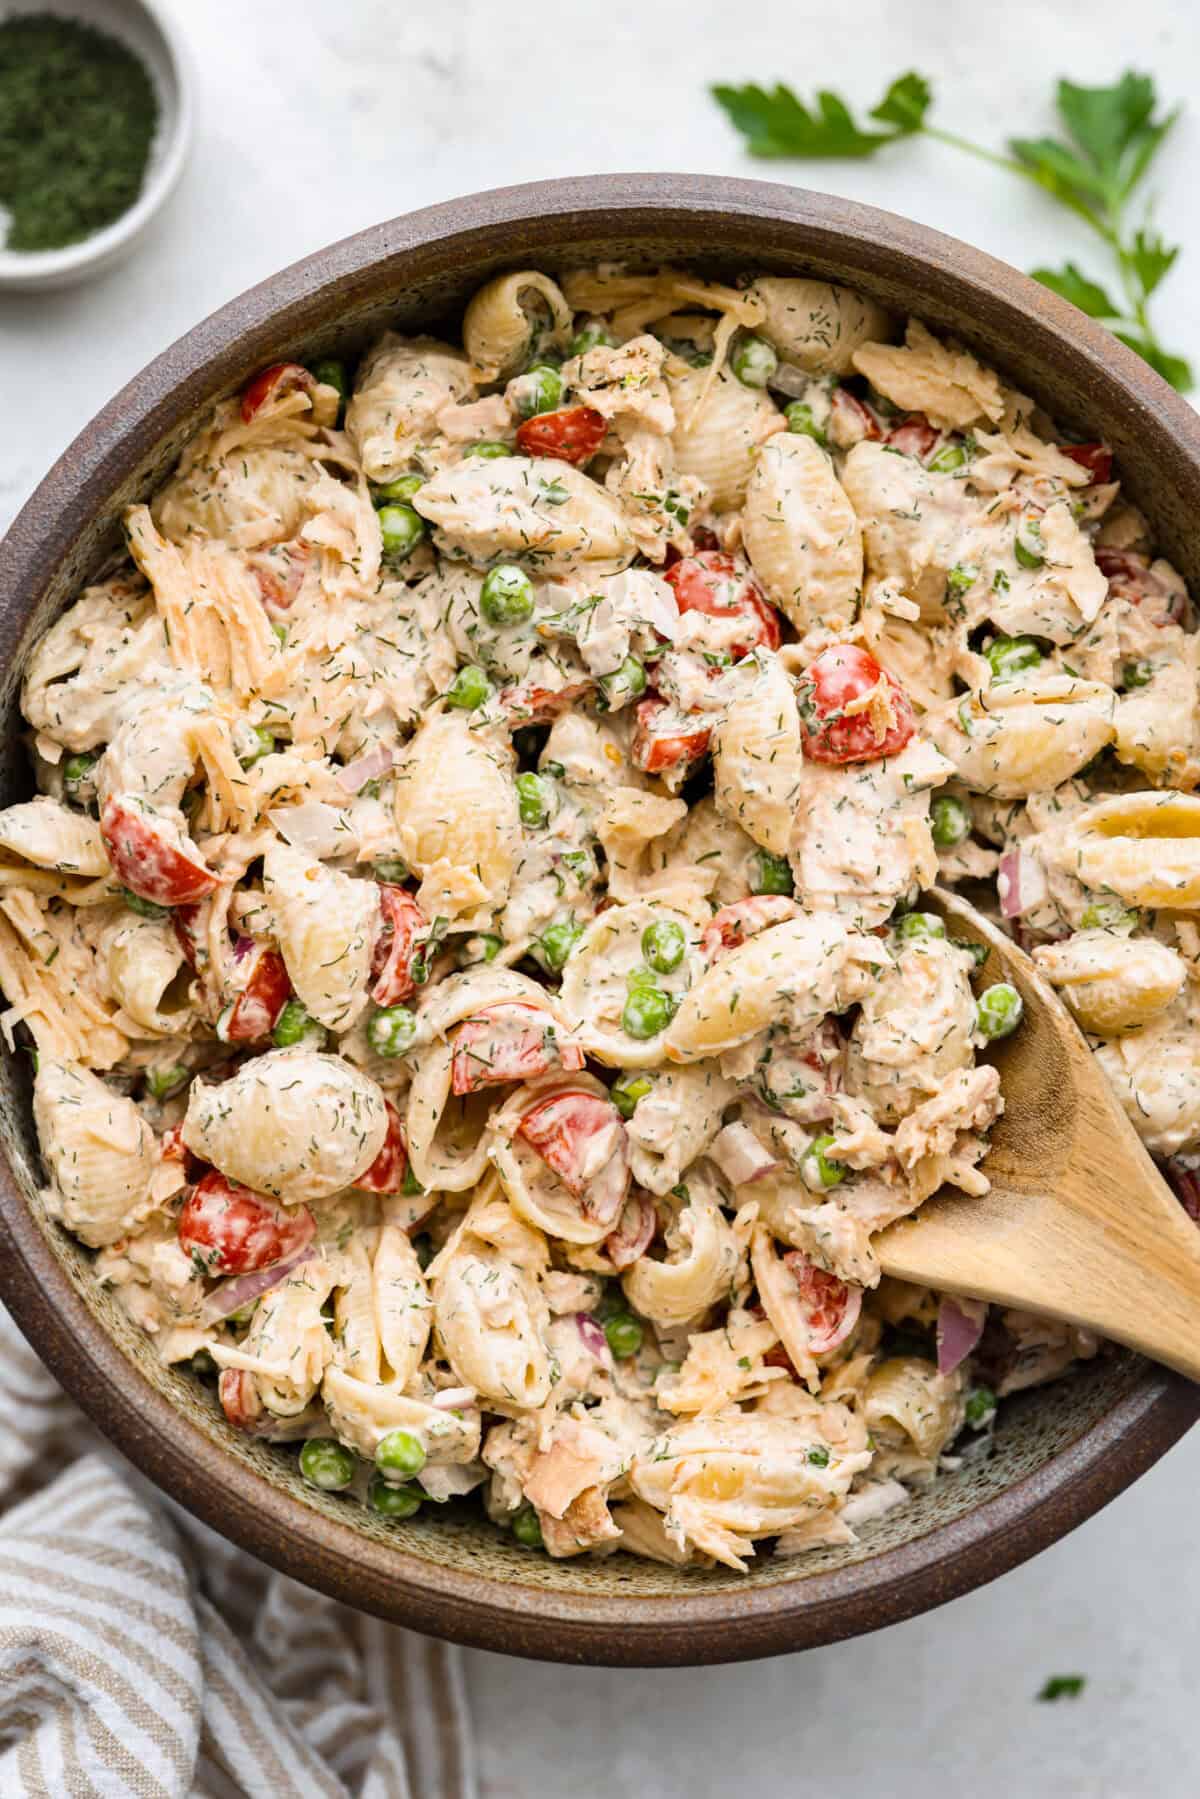 Top view of tuna pasta salad in a bowl with a wood spoon.